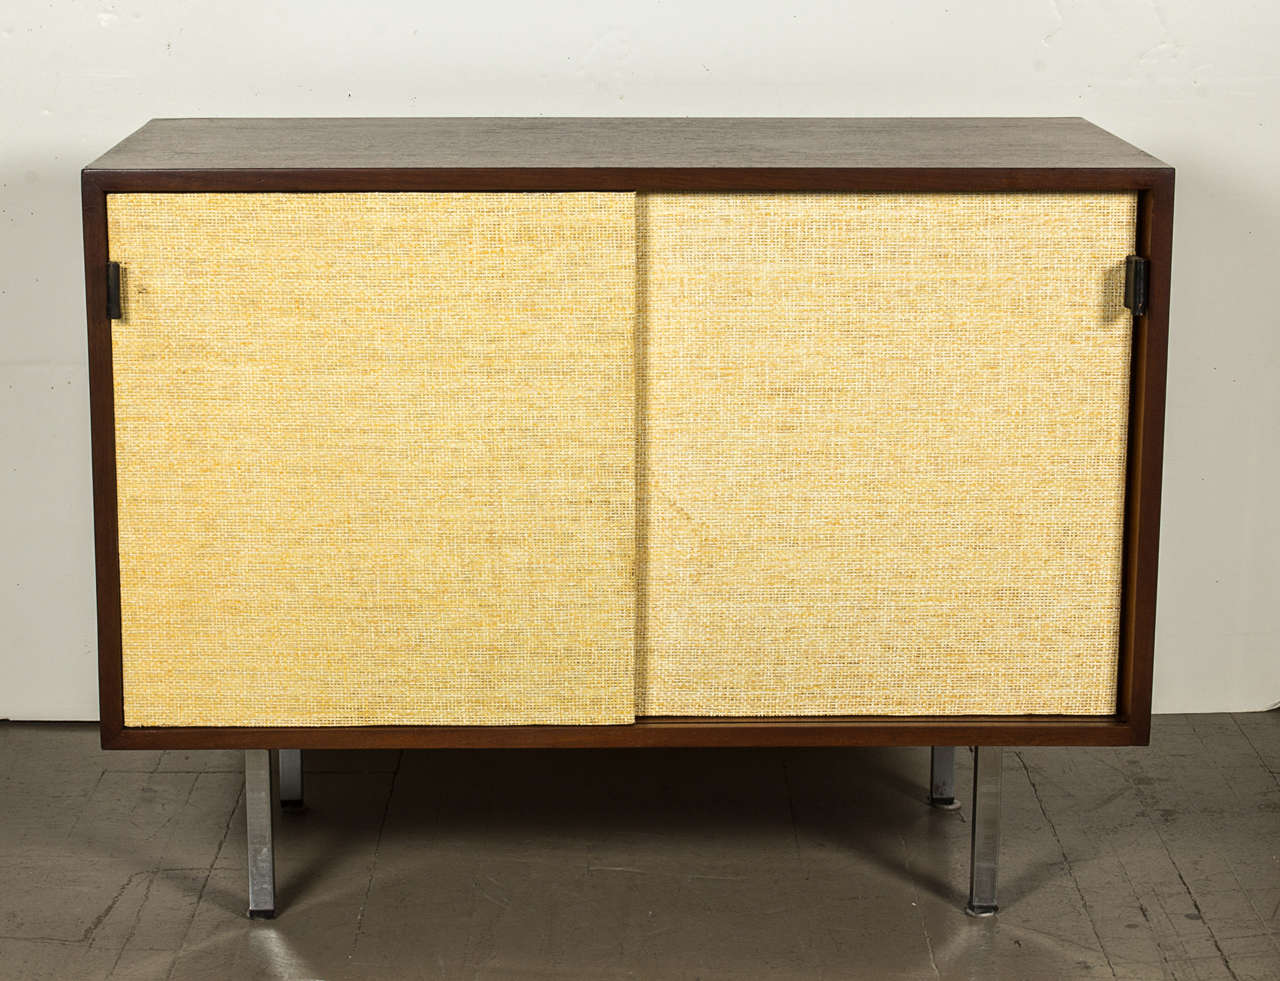 Florence Knoll walnut credenza with grass cloth doors and leather pulls.
Vintage item that has been refinished.